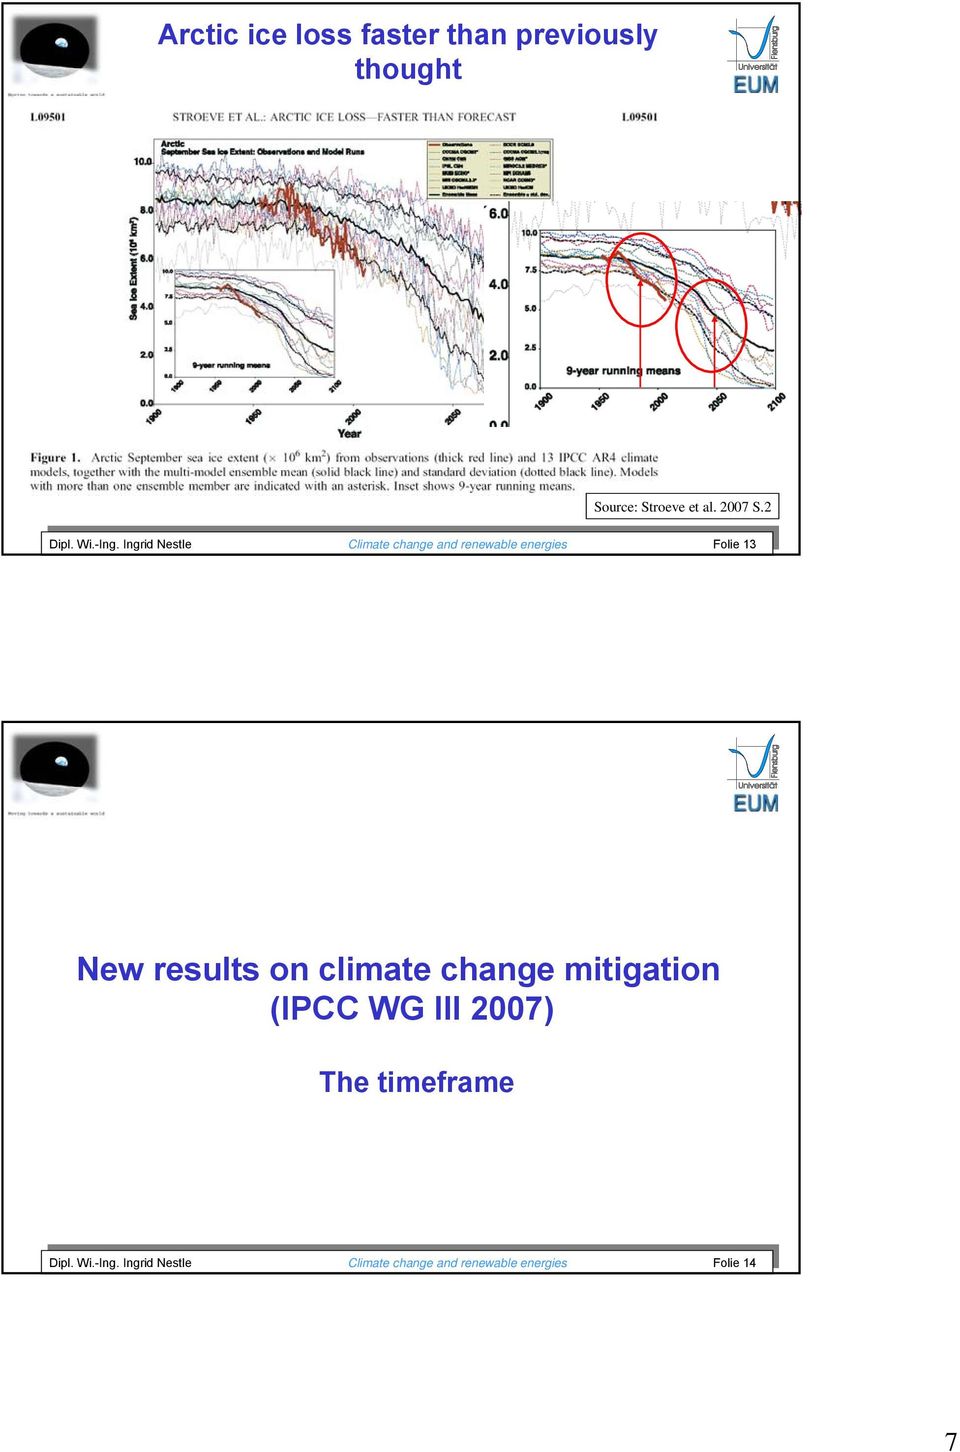 Ingrid Nestle Climate change and renewable energies Folie 13 New results on climate change mitigation (IPCC WG III